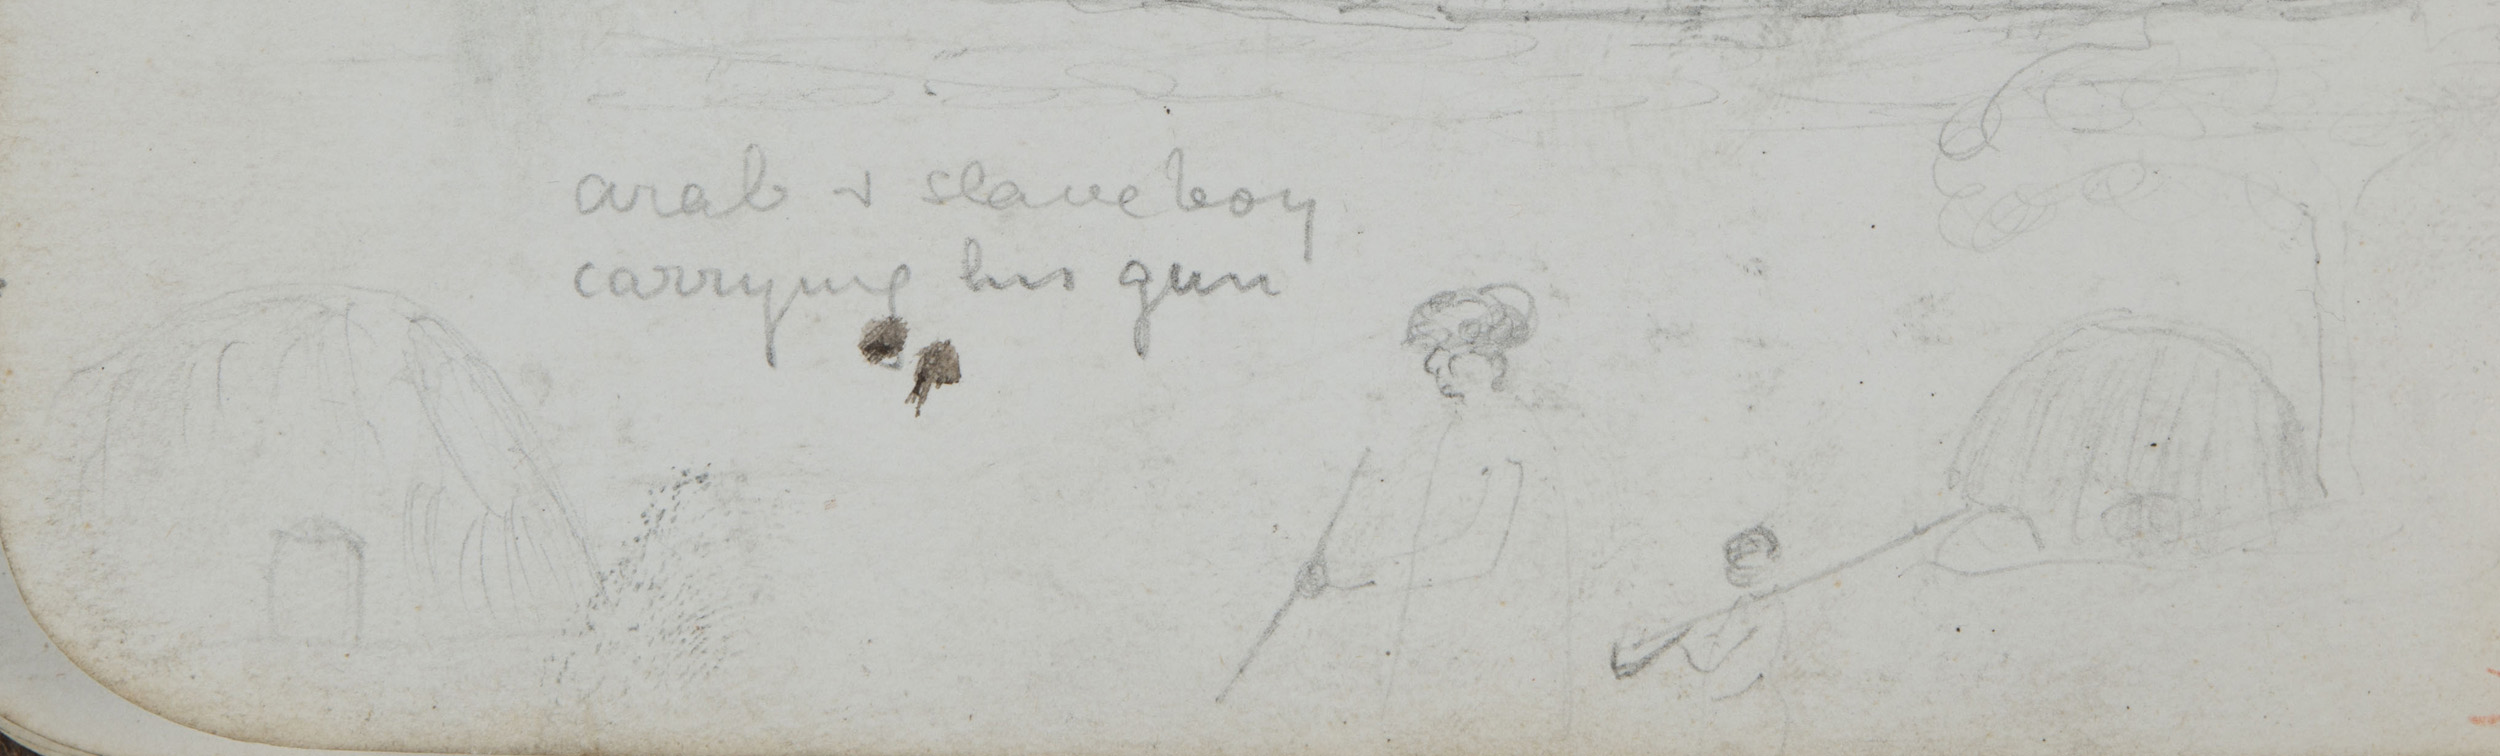 'Arab & slaveboy carrying his gun.' Illustration from a page of Field Diary XIV (Livingstone 1871n:[99]), detail. Copyright David Livingstone Centre. Creative Commons Attribution-NonCommercial 3.0 Unported (https://creativecommons.org/licenses/by-nc/3.0/).